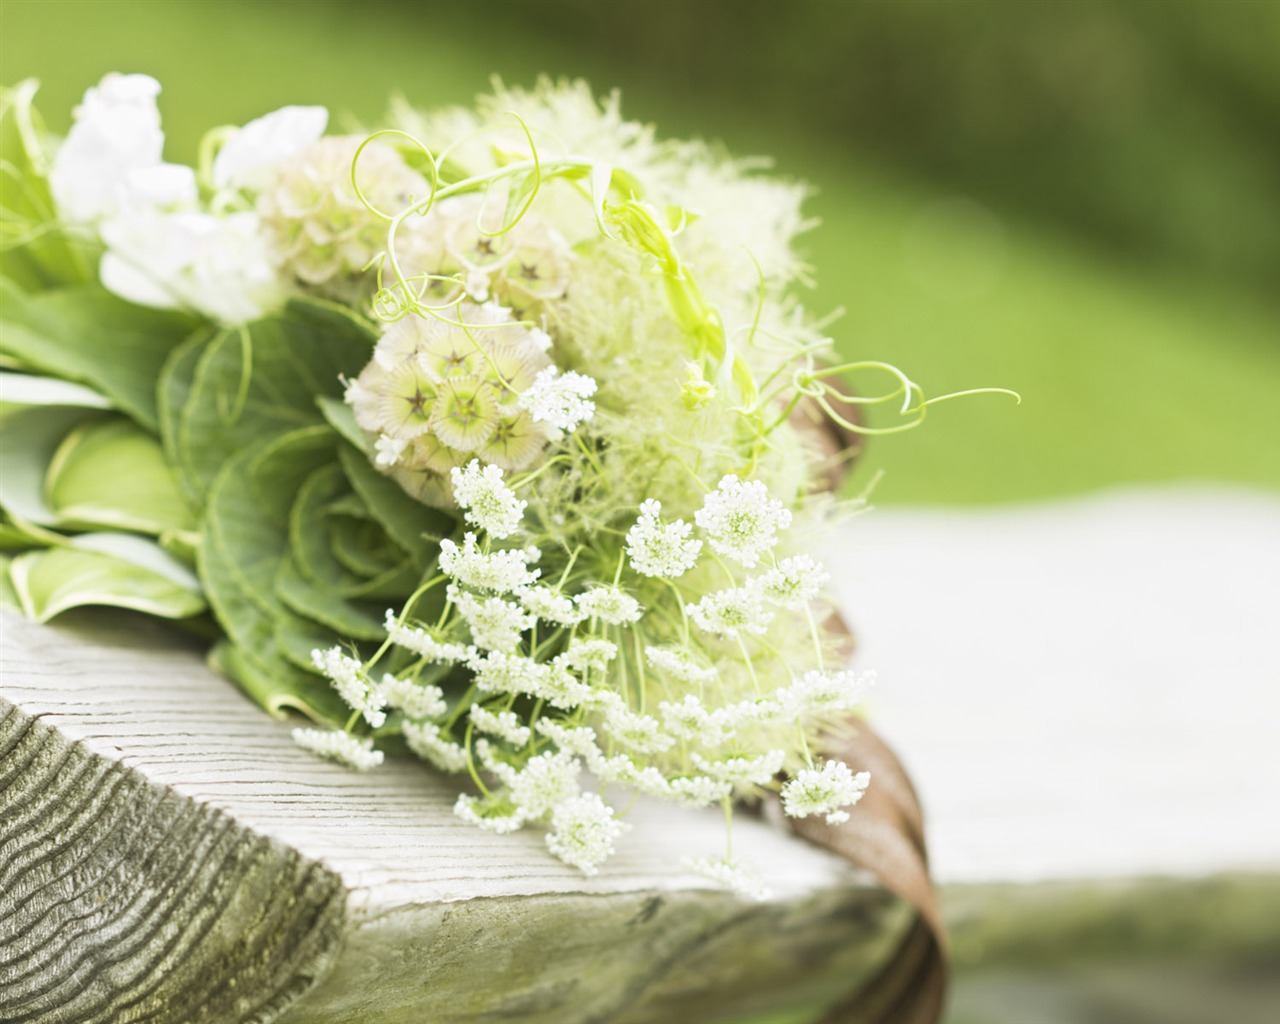 Weddings and Flowers wallpaper (2) #19 - 1280x1024